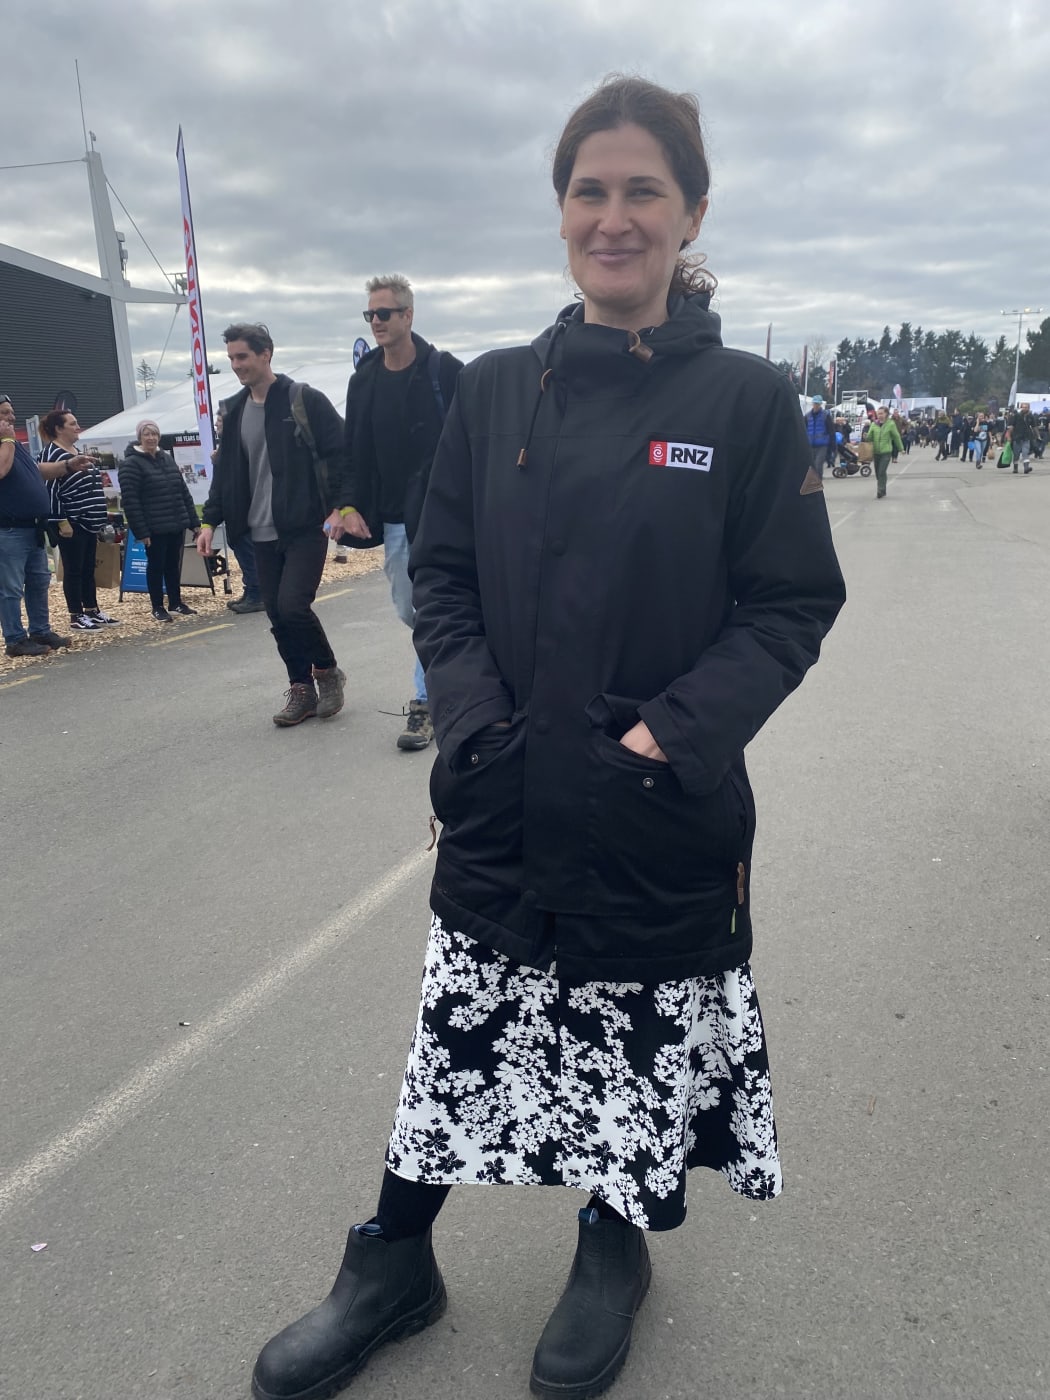 For her Fieldays debut, Marika is wearing her work Kathmandu jacket and a dress paired with oversized gum boots.